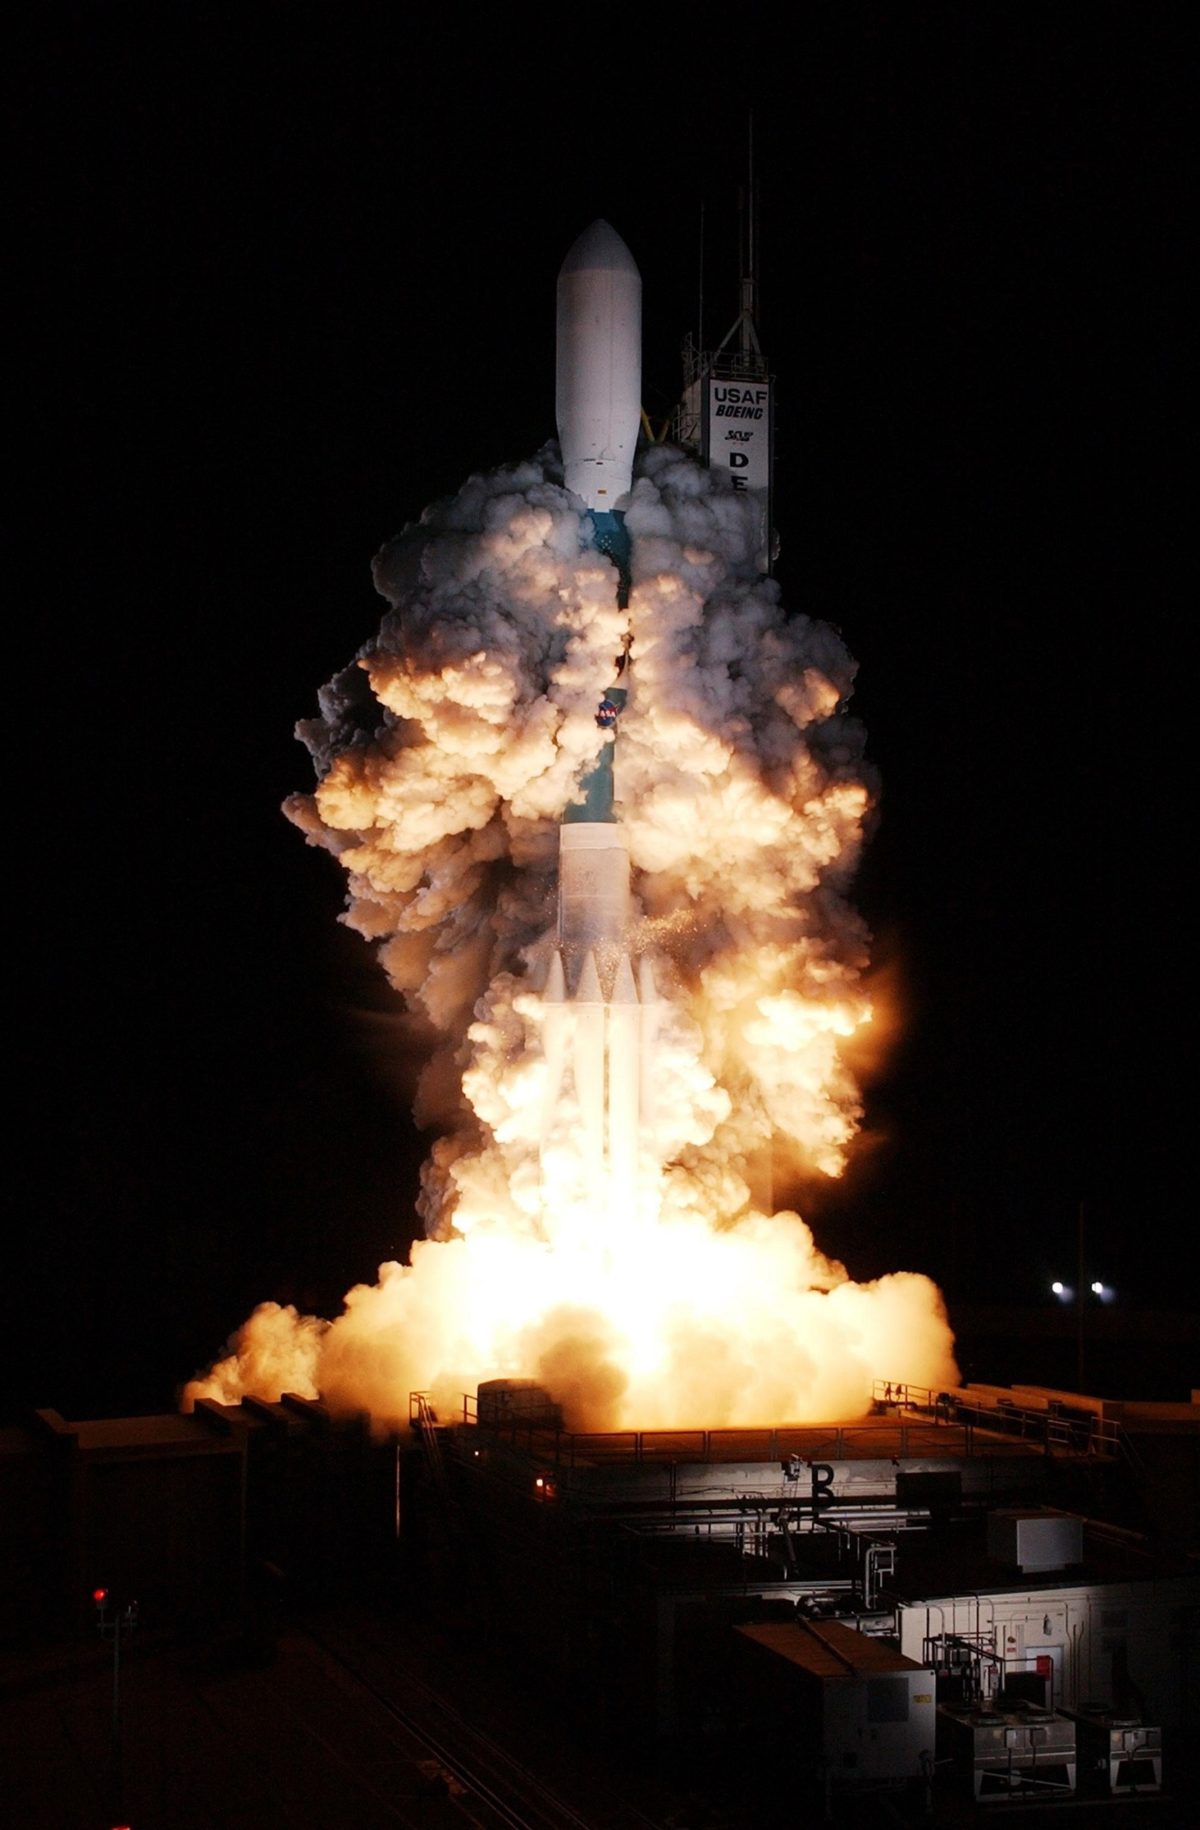 Rocket with space shuttle blasting off.